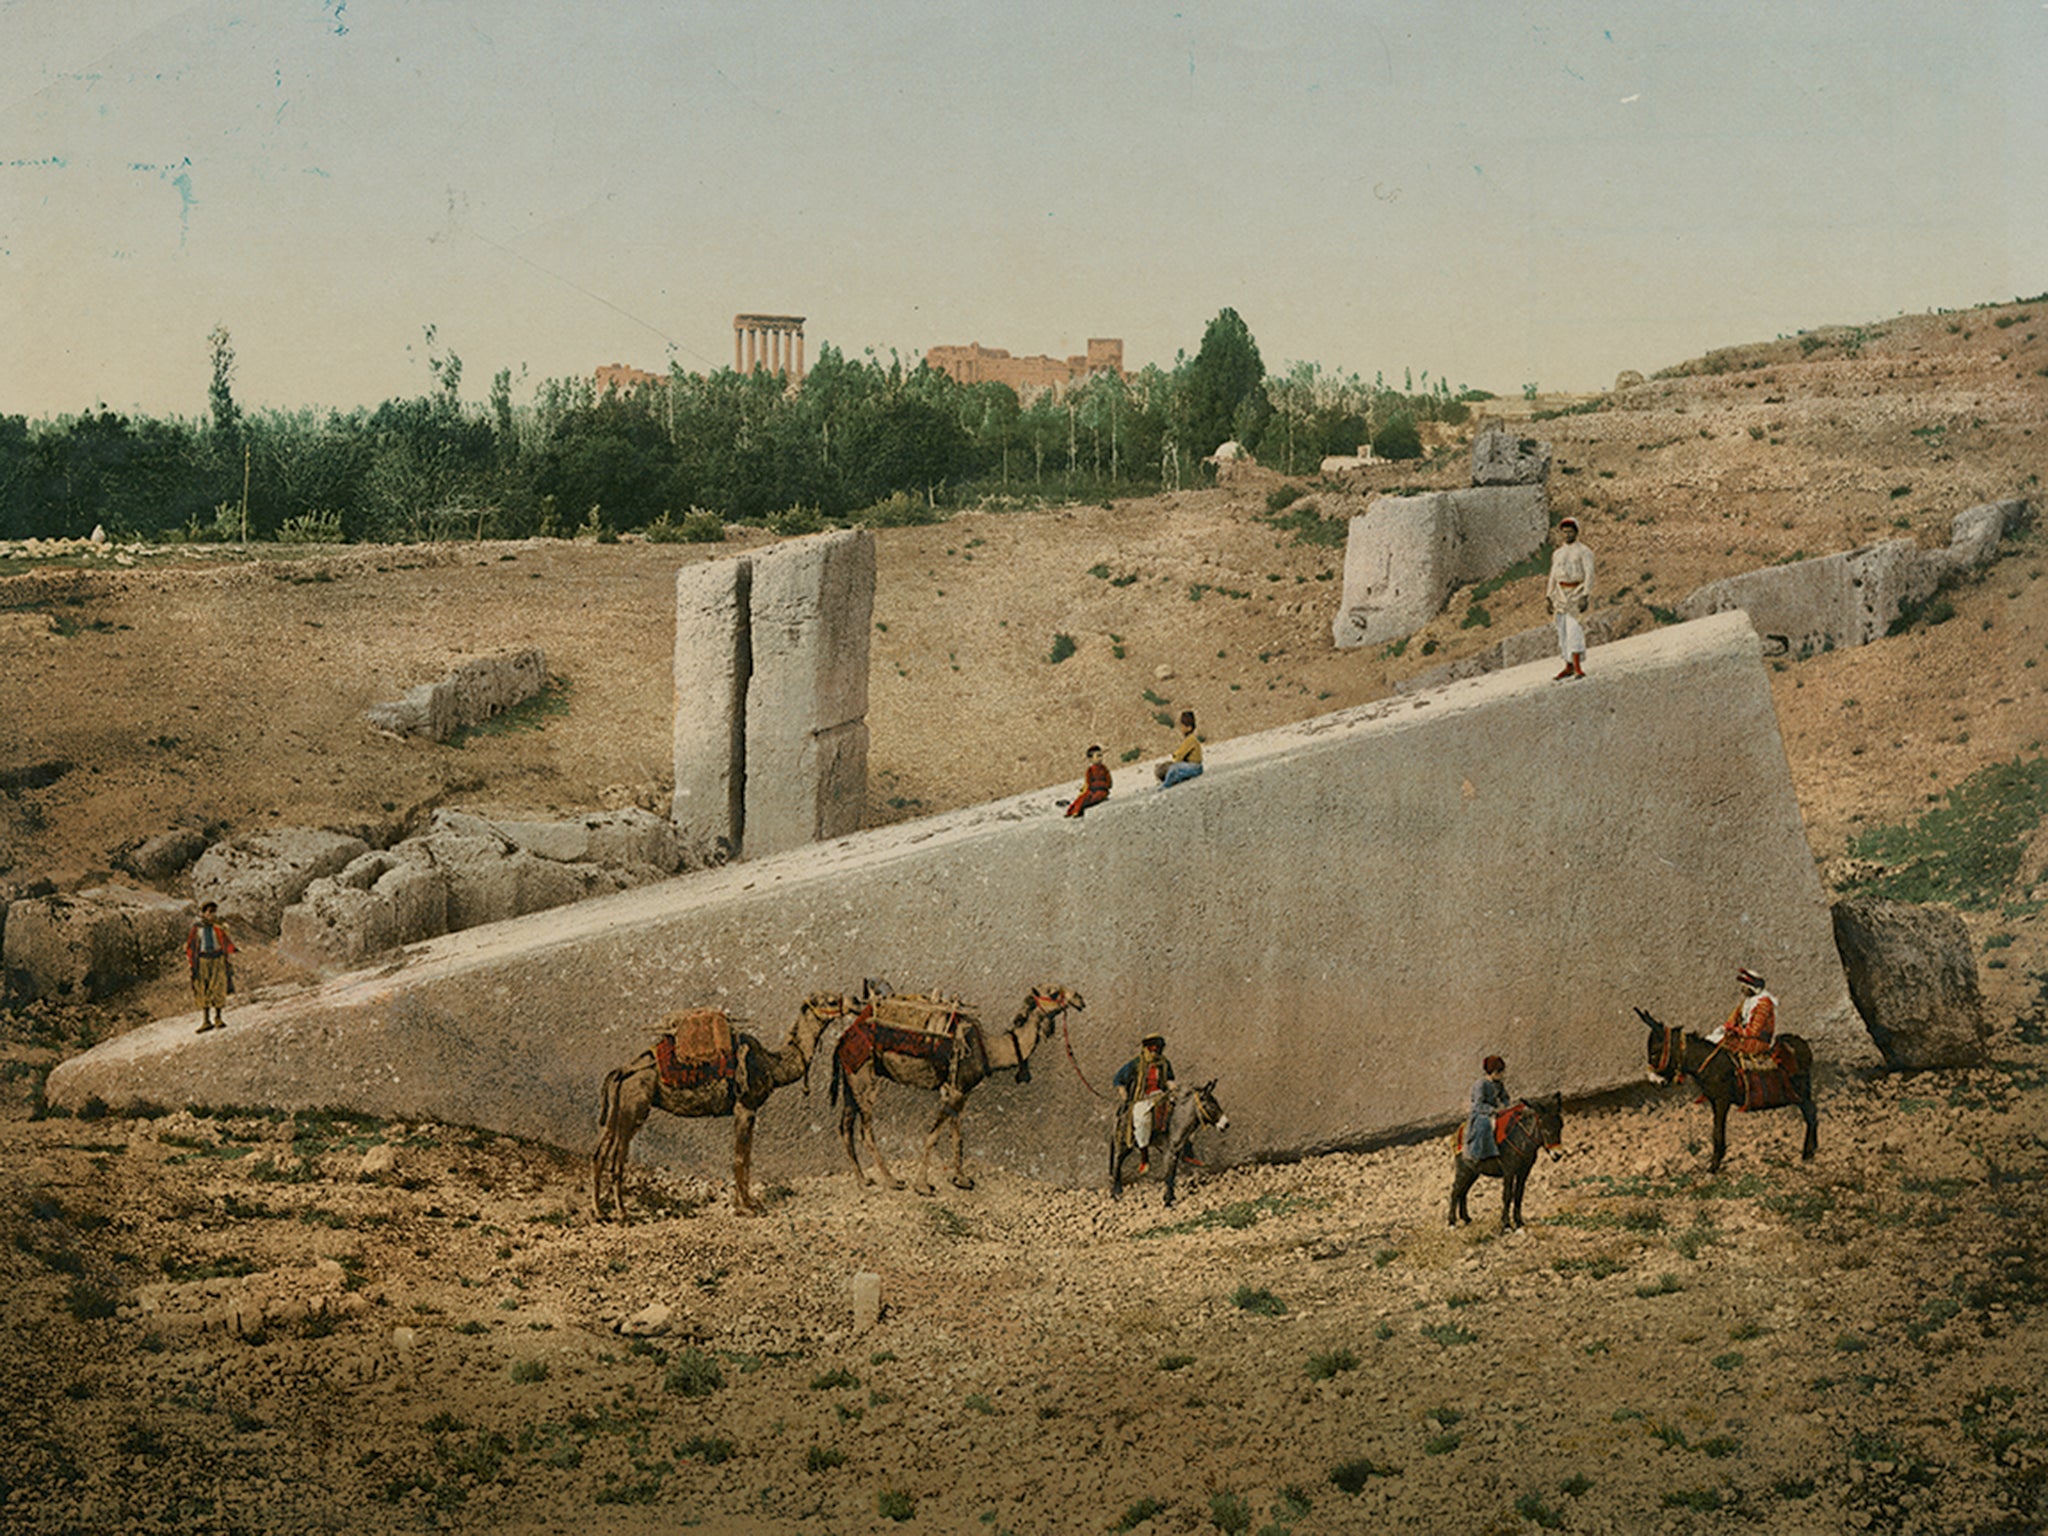 Ruins of a monolith in Lebanon, circa 1900: the Roman presence in what is now the Arab world was as violent as that of later empires